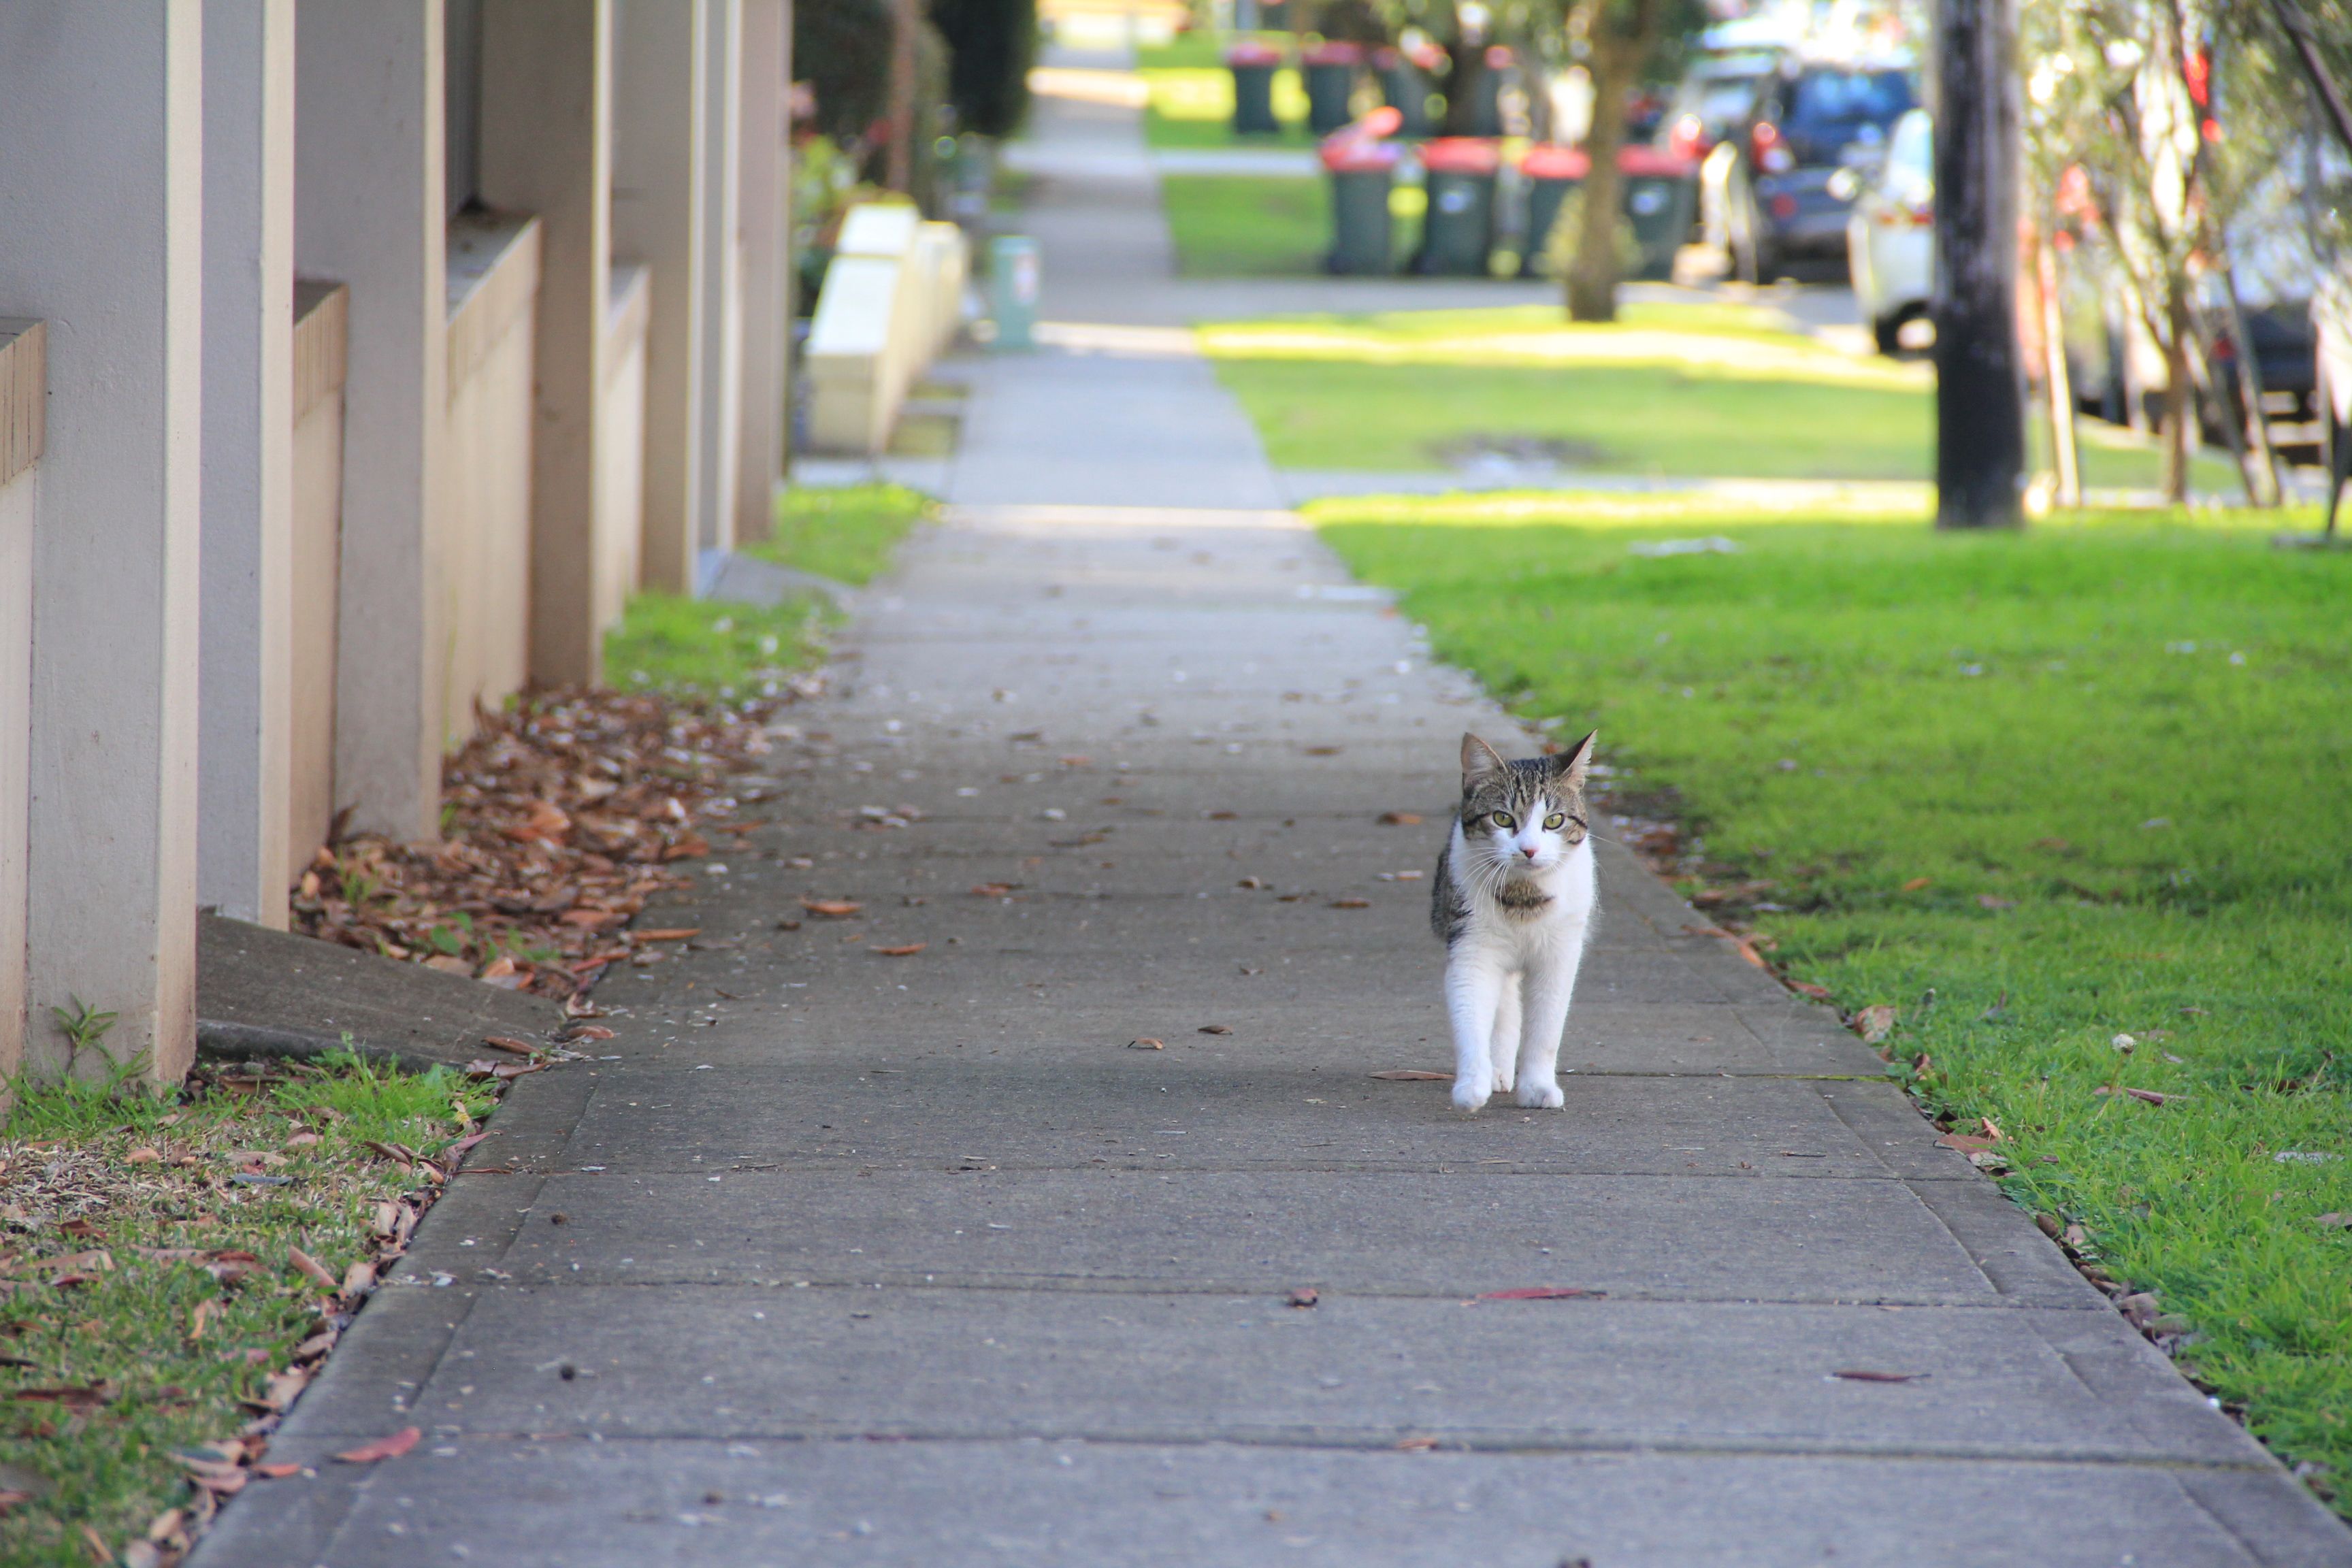 Tabby and white cat walking down a street with footpath in background